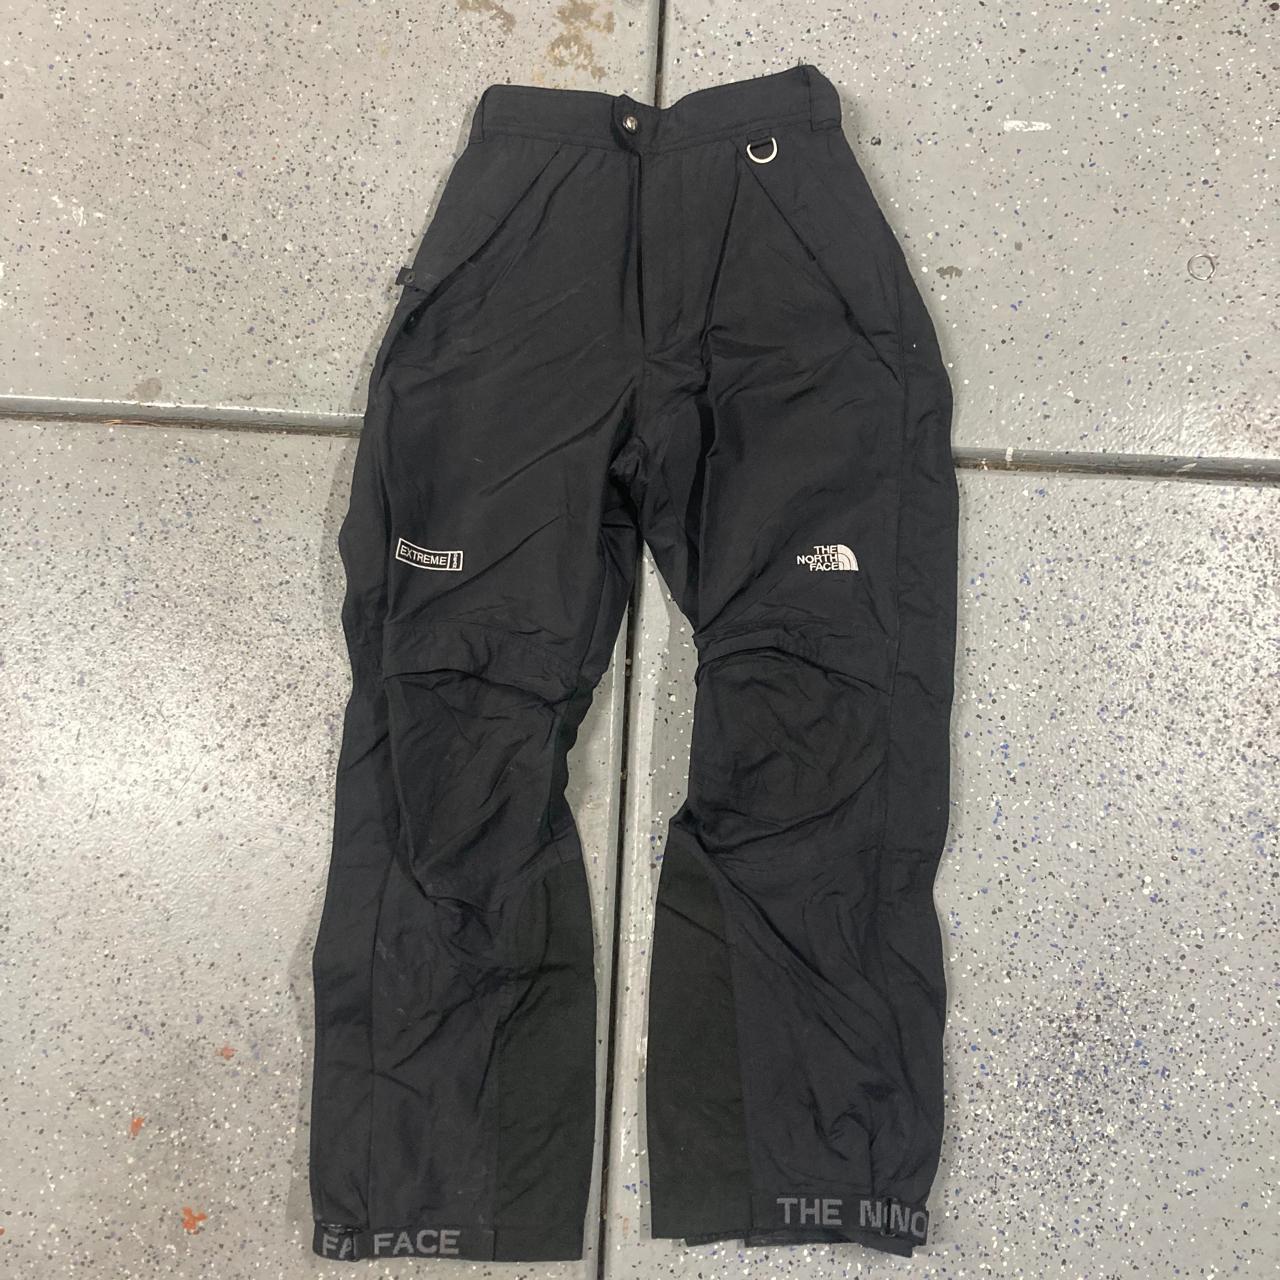 The North Face Women's Black and Grey Trousers | Depop